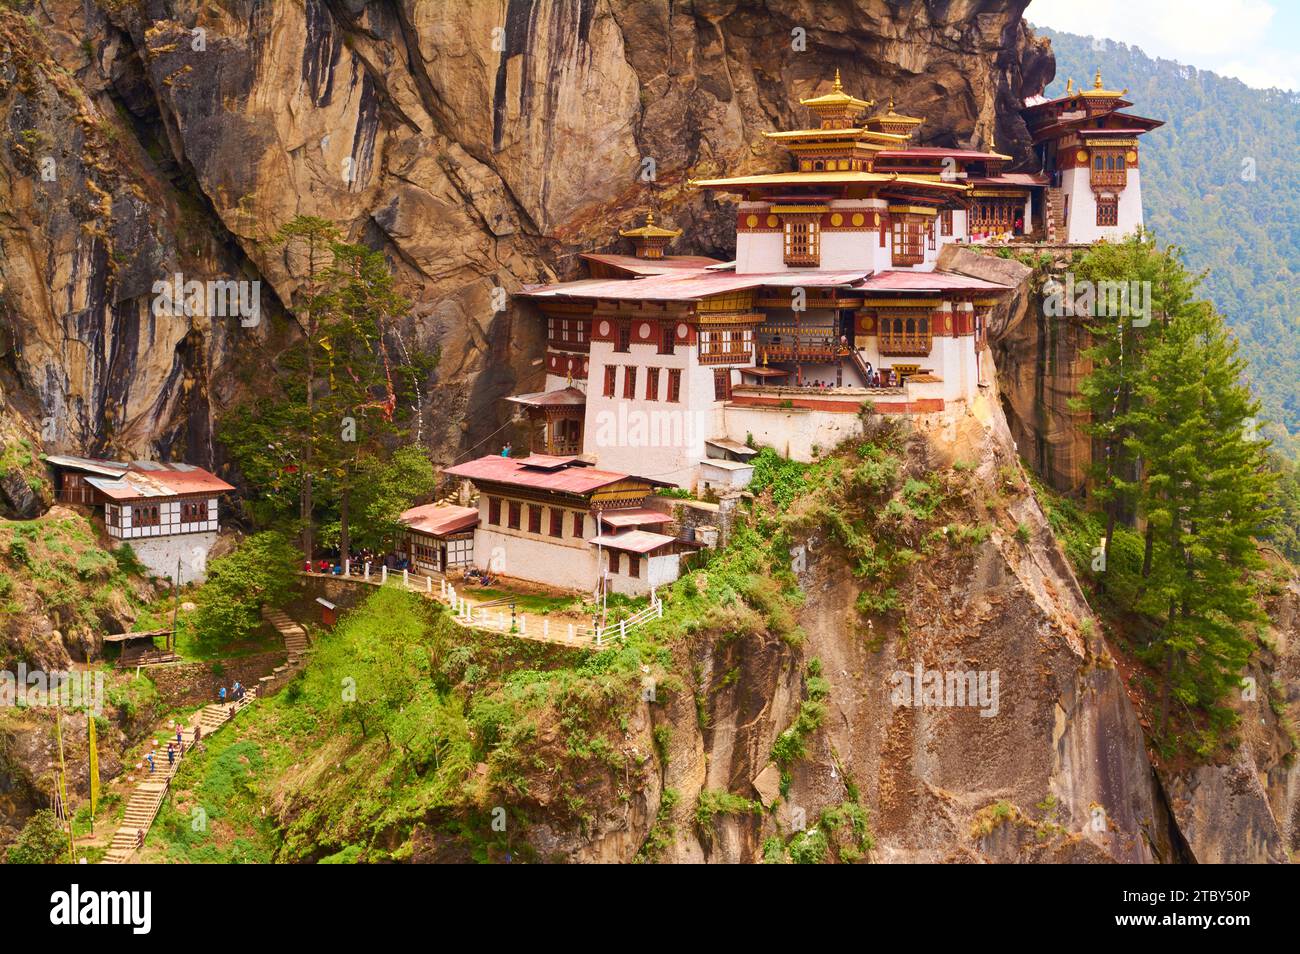 Paro Taktsang, the Tiger's Nest Monastery, a sacred Buddhist site built into the cliff face above the town of Paro in the kingdom of Bhutan. Stock Photo